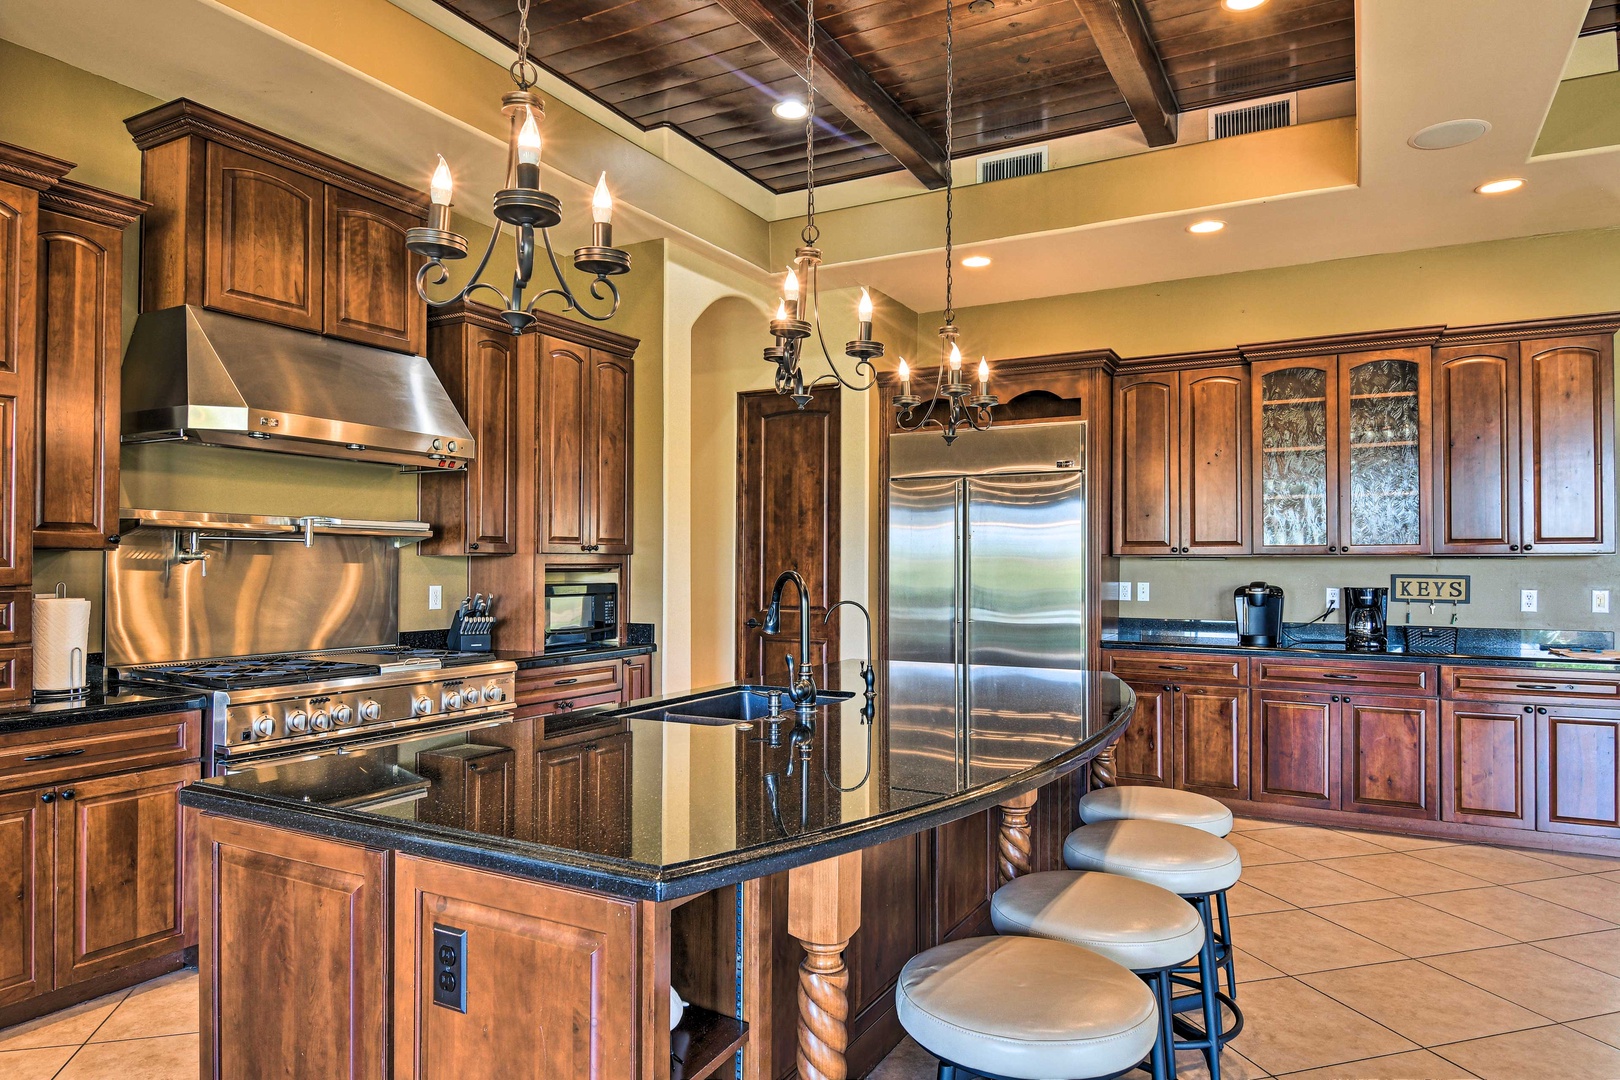 The gorgeous, updated kitchen offers ample space & all the comforts of home